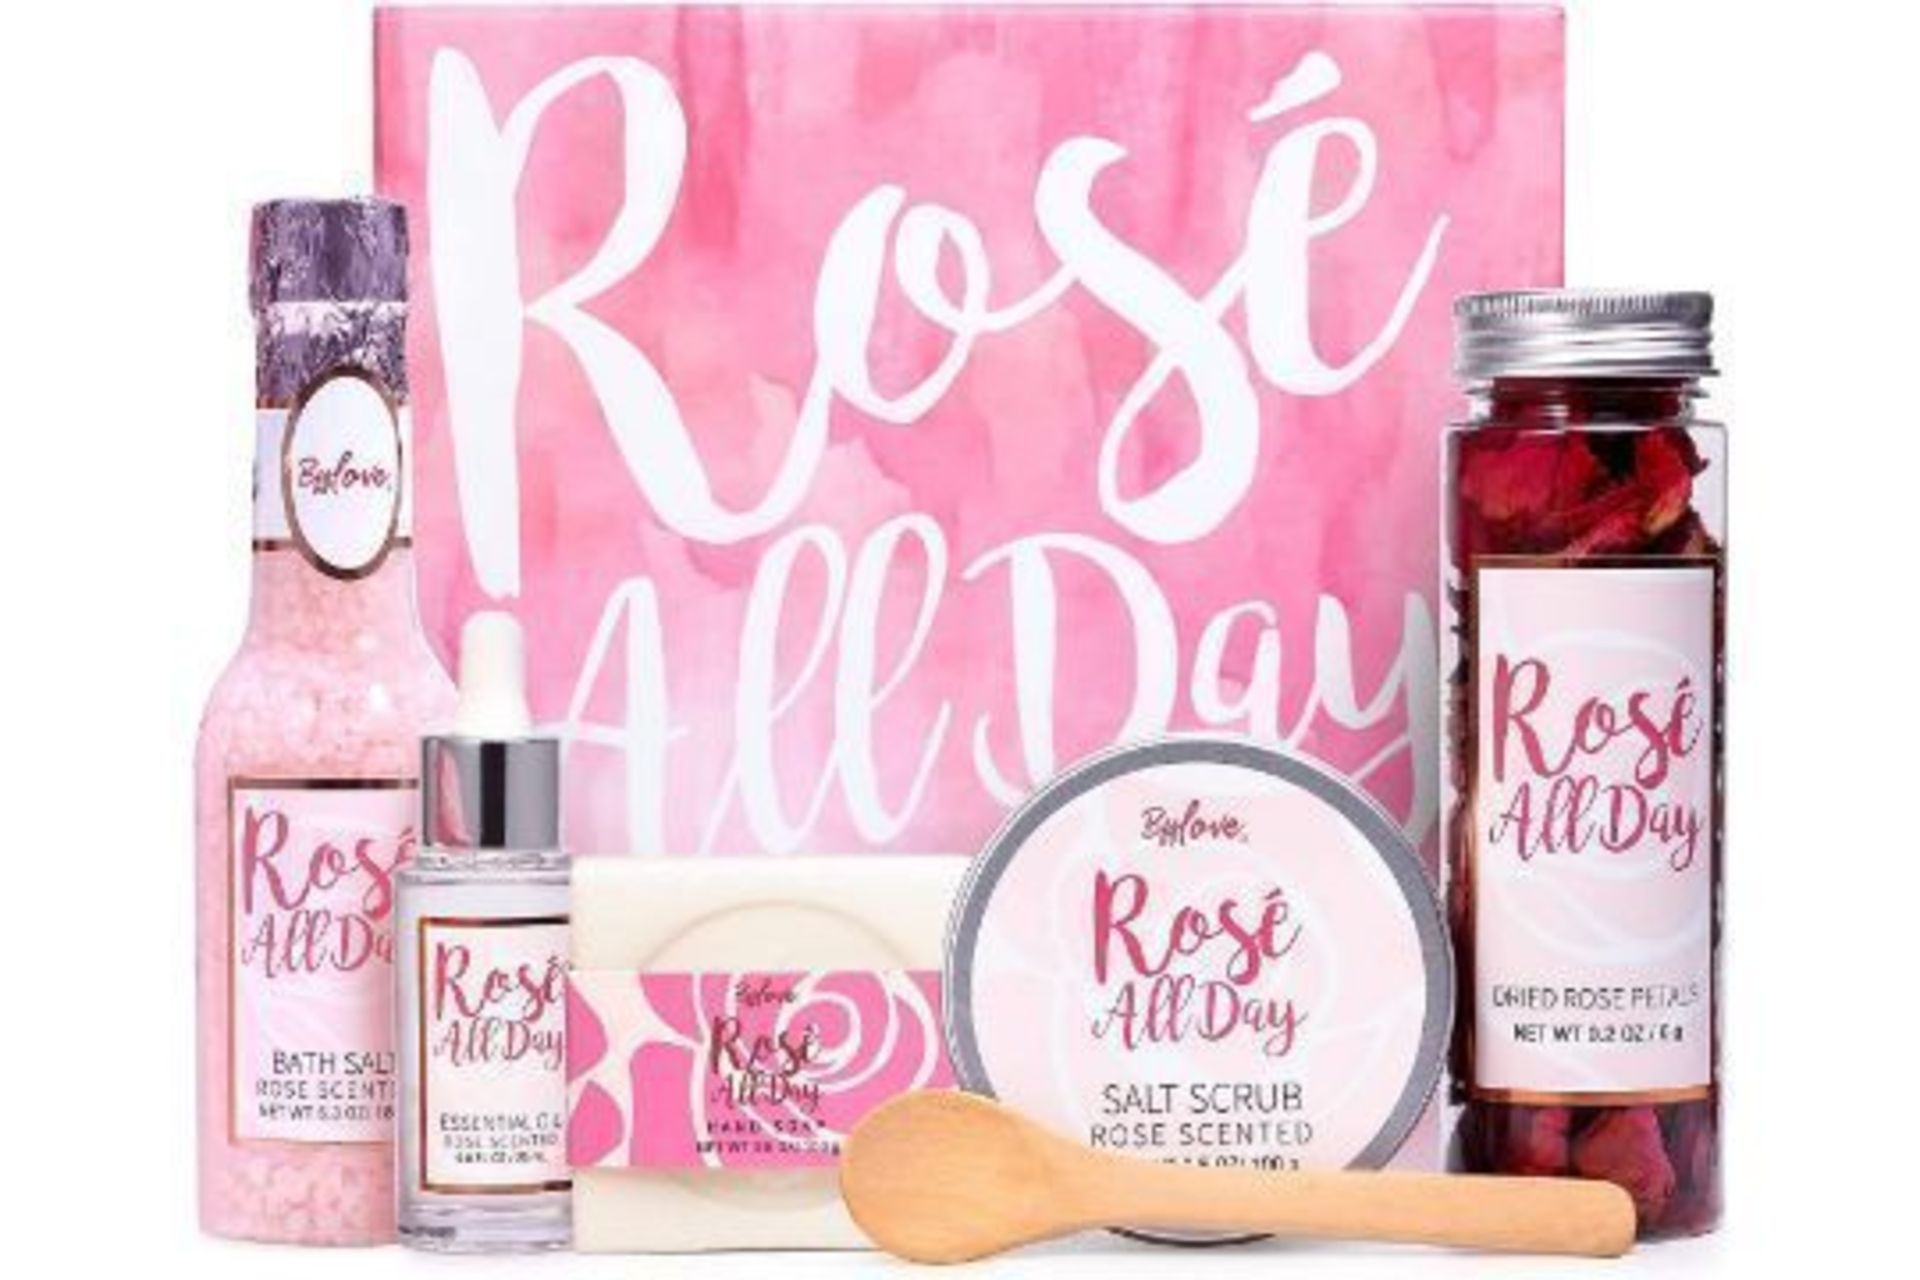 3 X NEW PACKAGED Rose All Day Bath Gift Box. (SKU:BFF-BP-11) Best Gift Set for Women - Our spa